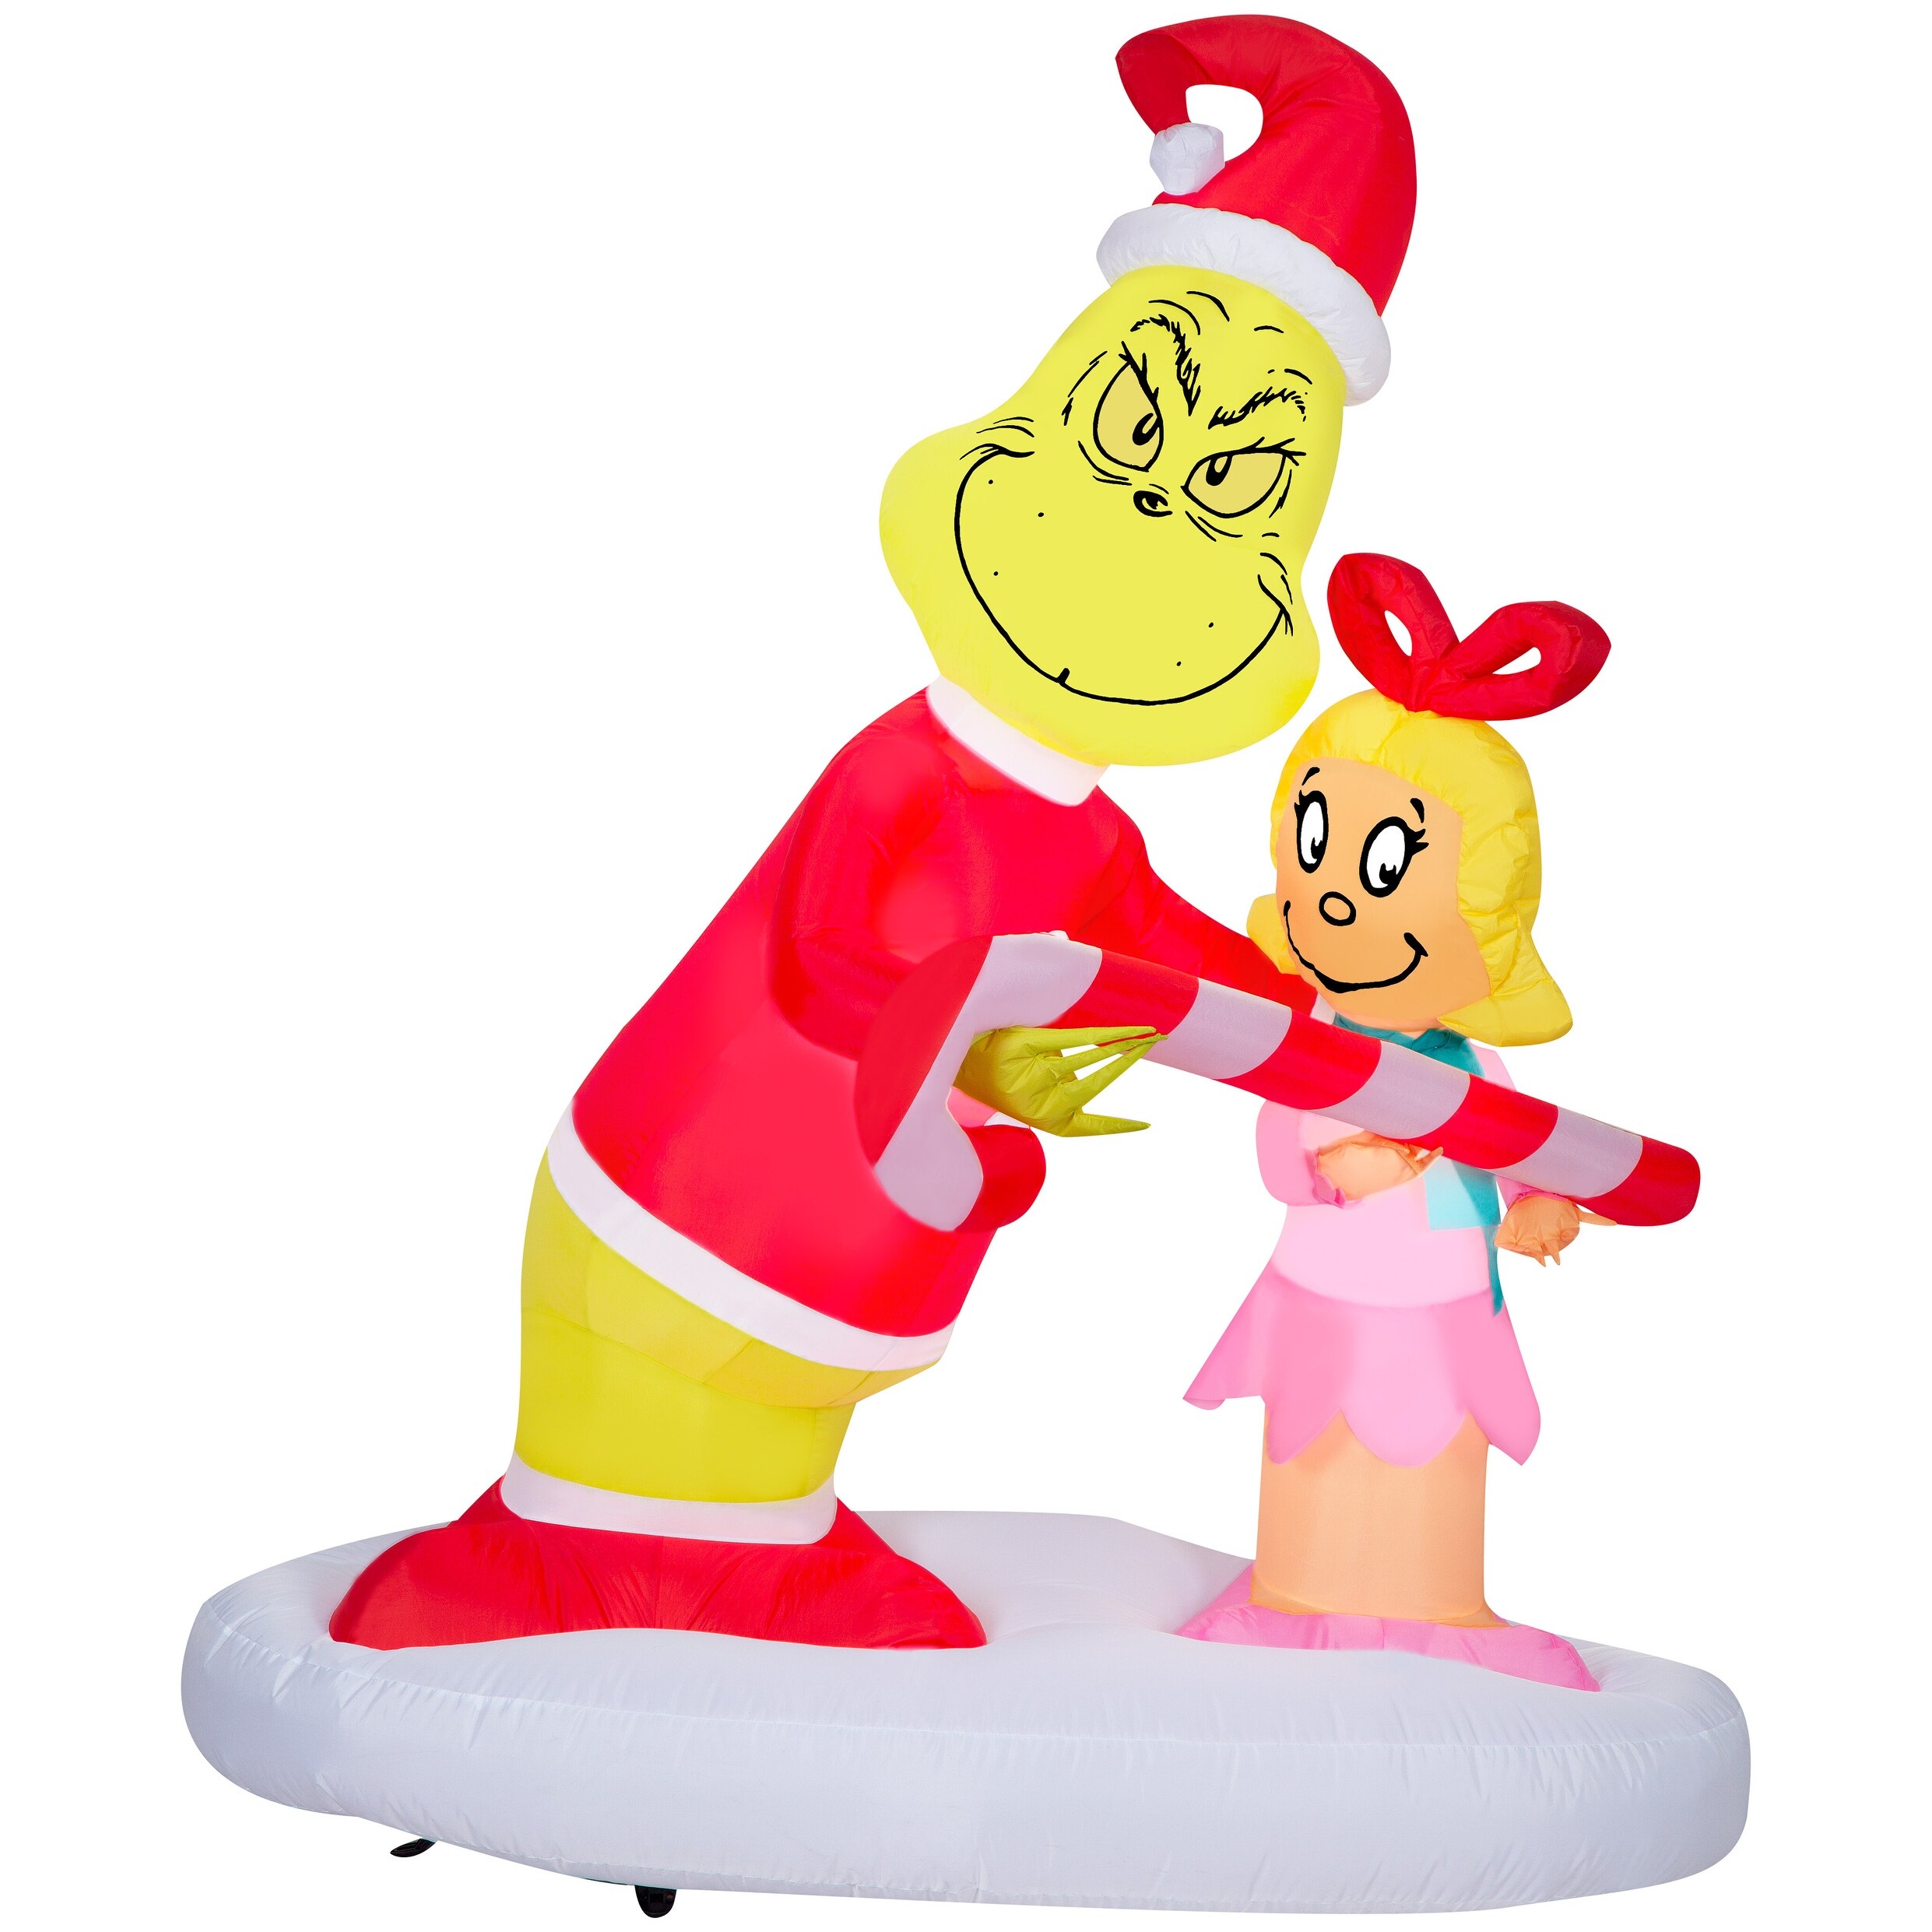 Disney Airblown Car Buddy Inflatable The Grinch